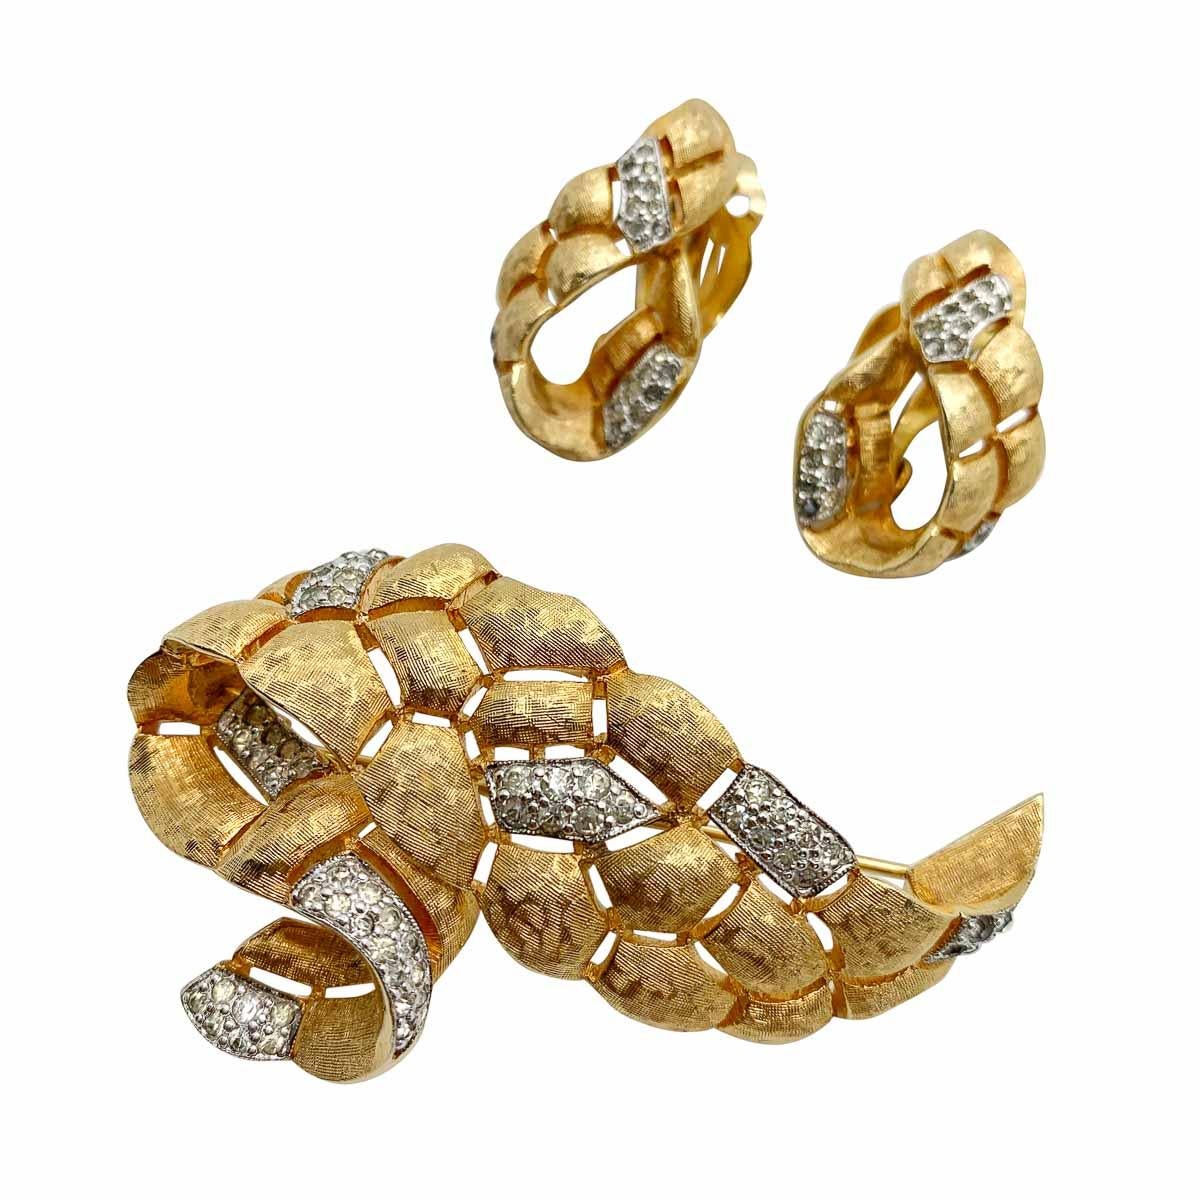 A vintage Jomaz swag brooch and earrings from the 1960s. Featuring a stylish swag style design, textured gold panelling and contrasting pave set crystal panels. The roots of Jomaz jewellery go back to 1927, when Joseph and Louis Mazer founded Mazer